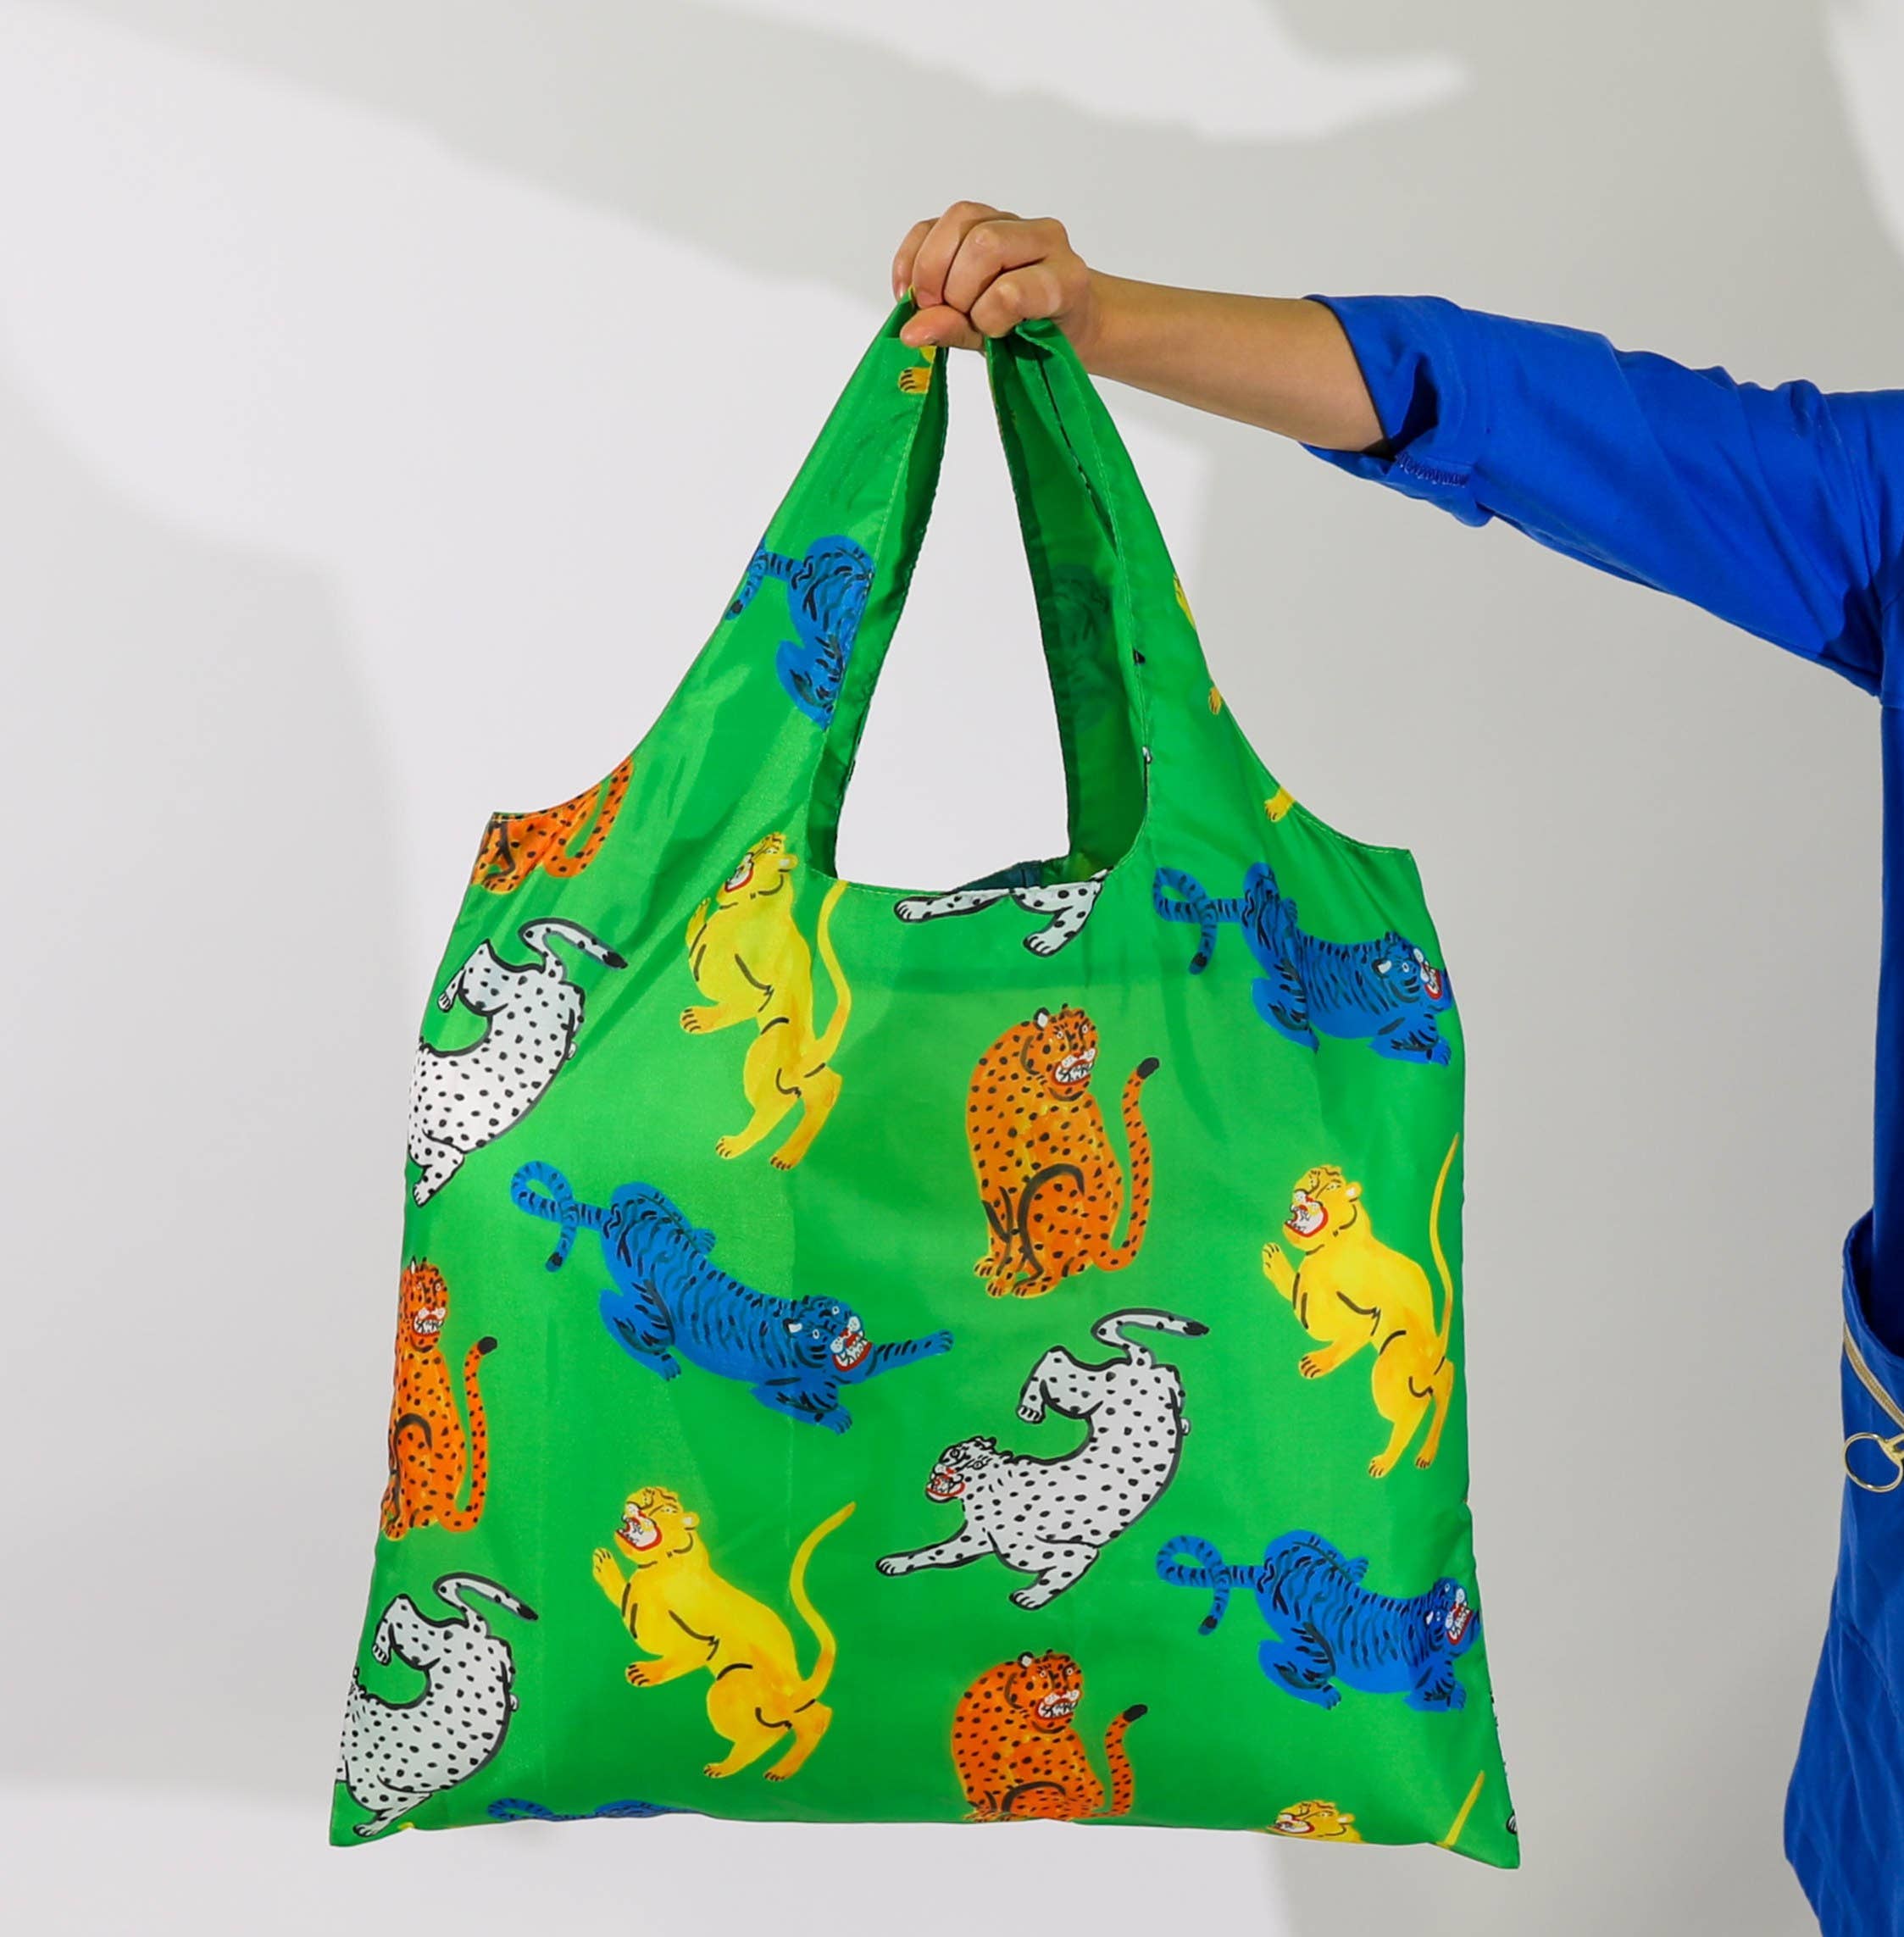 Wild Cats Art Reusable Tote by Kristina Micotti